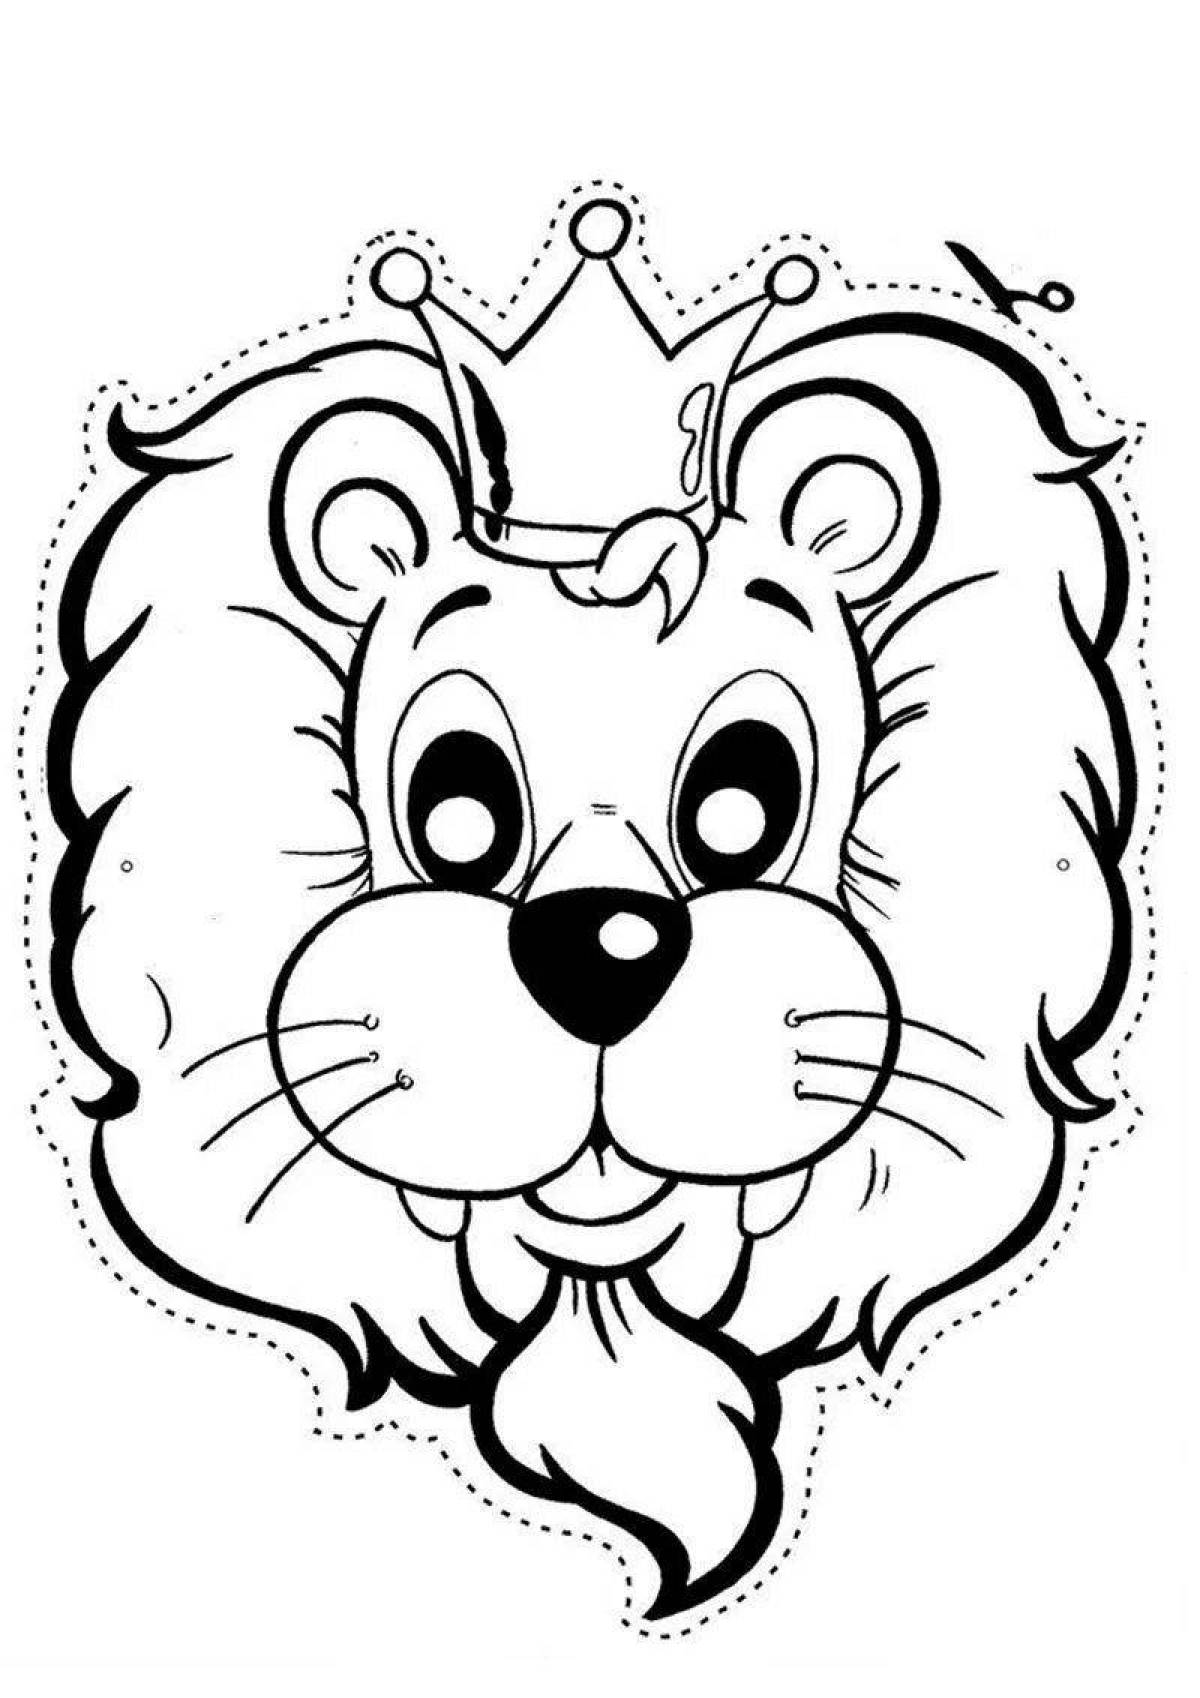 Attractive face coloring pages